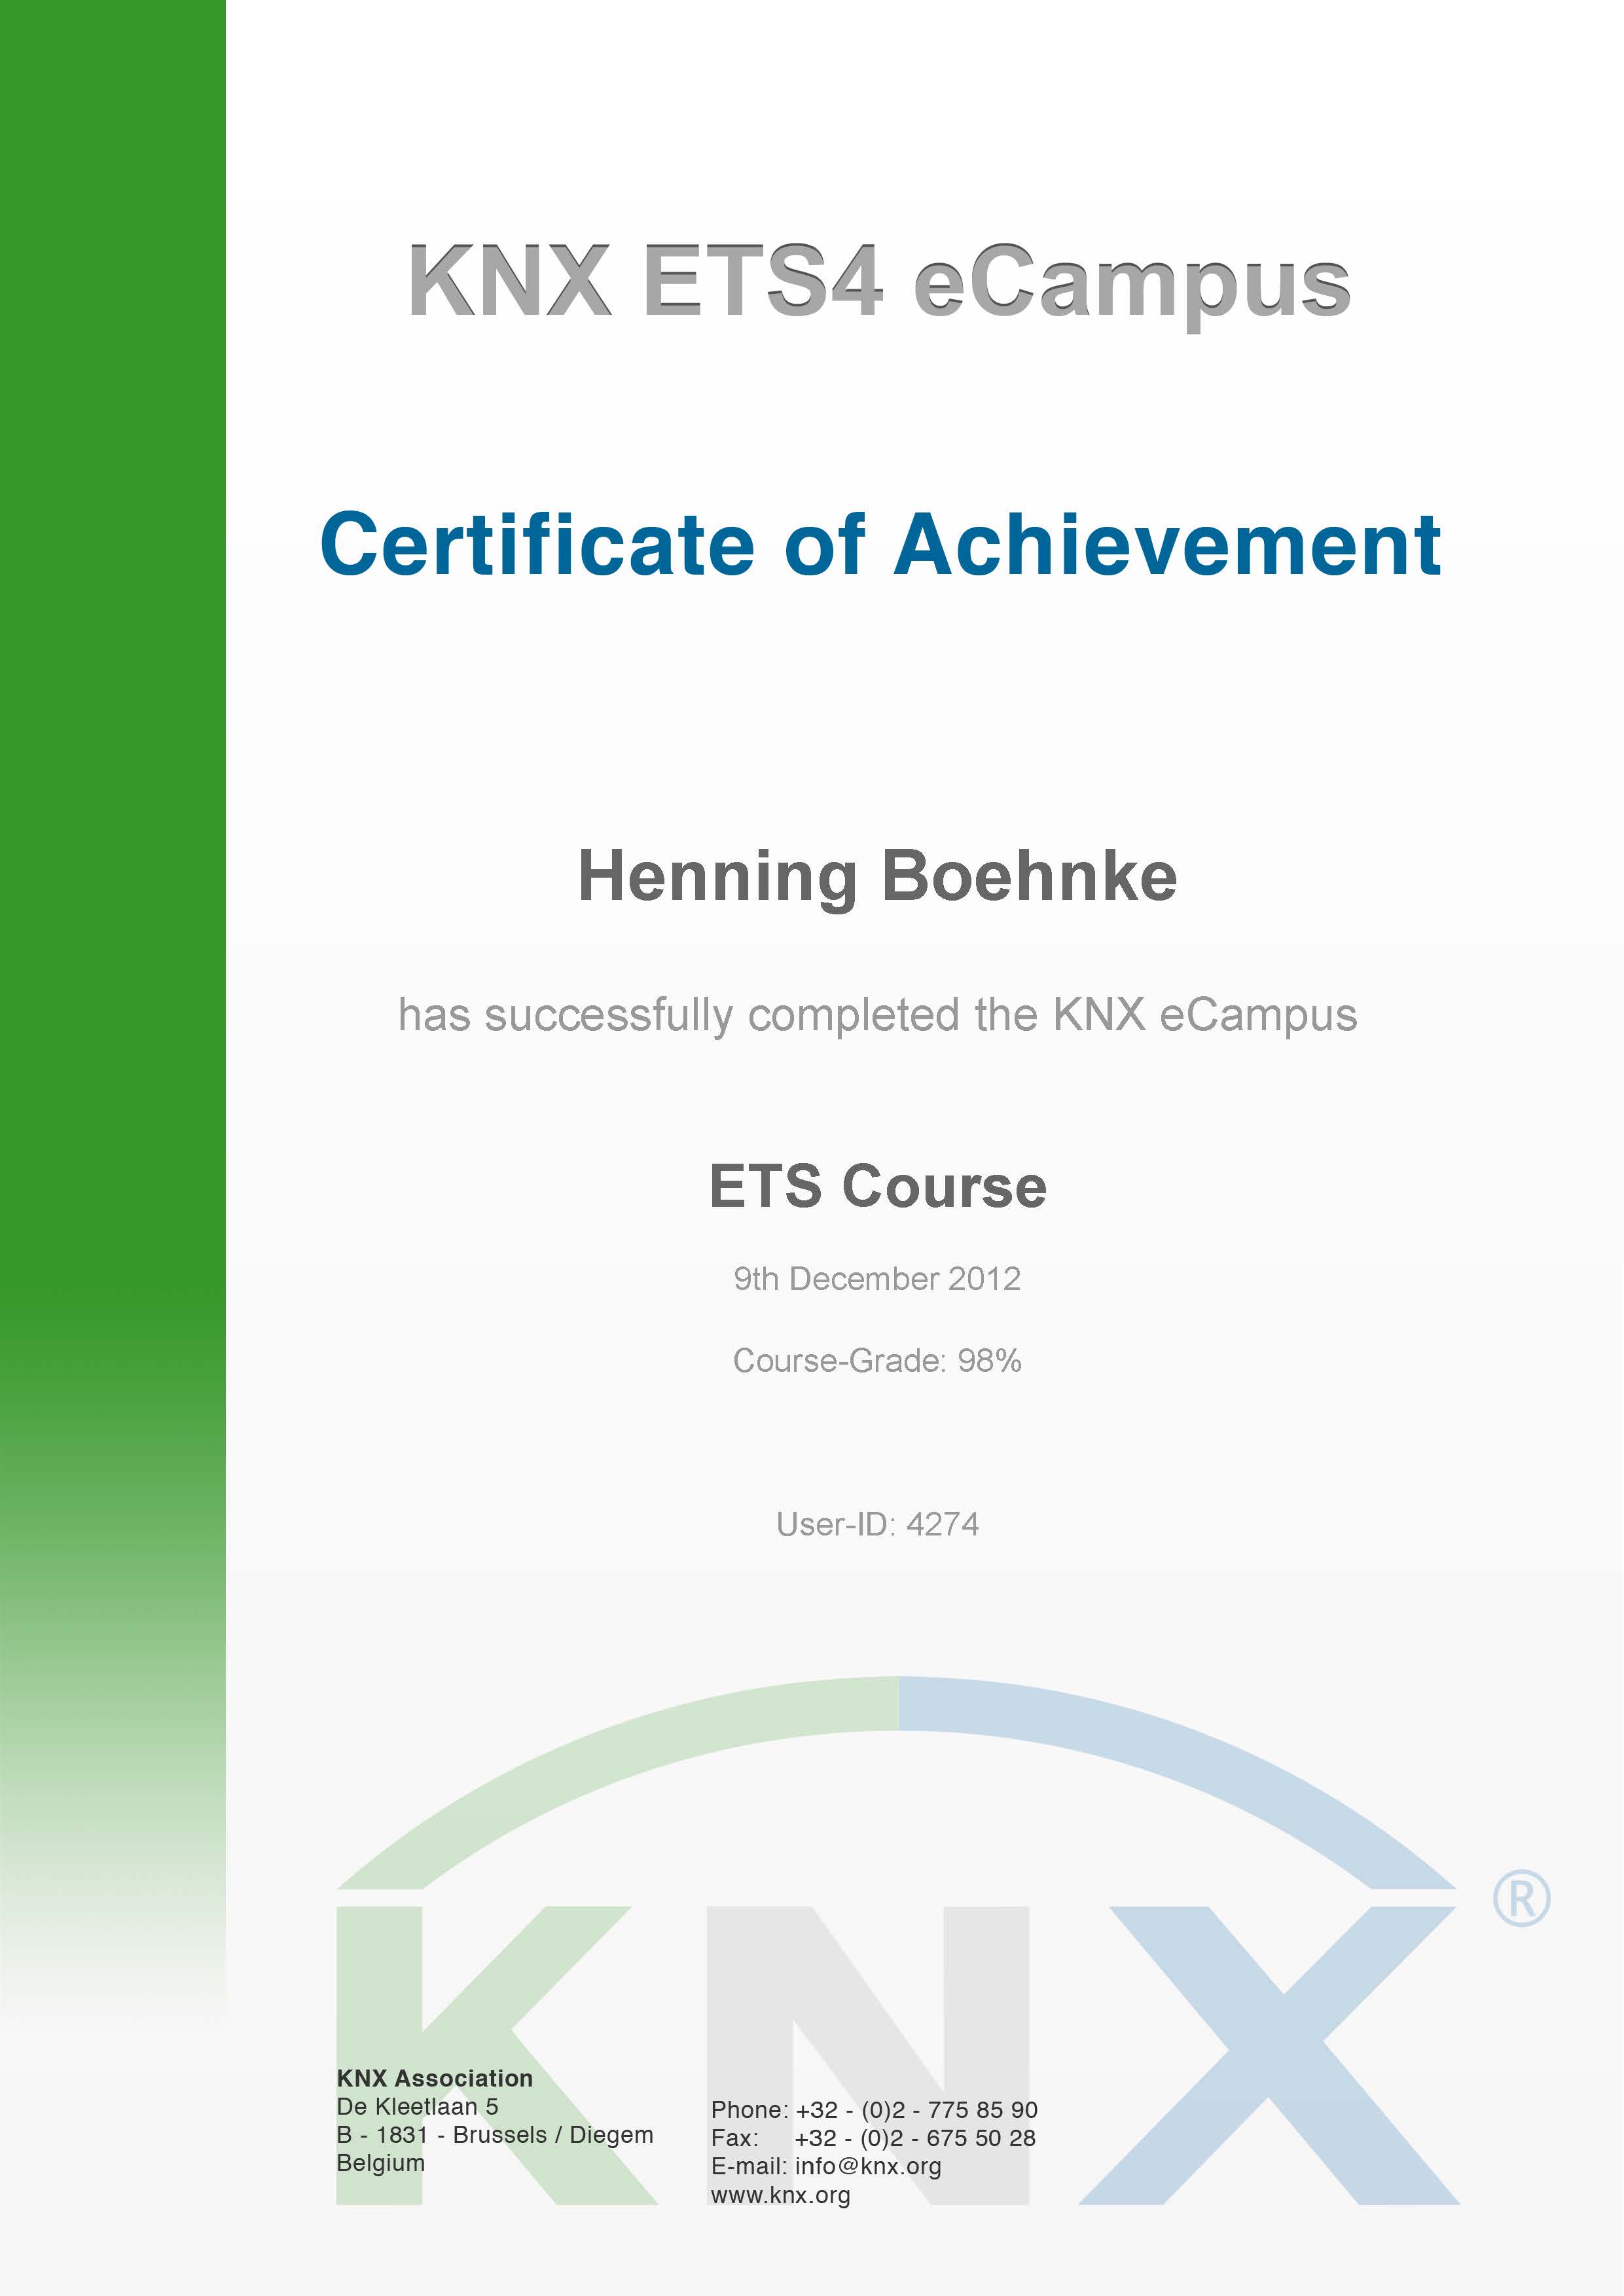 KNX ETS4 Certificate of Archievement